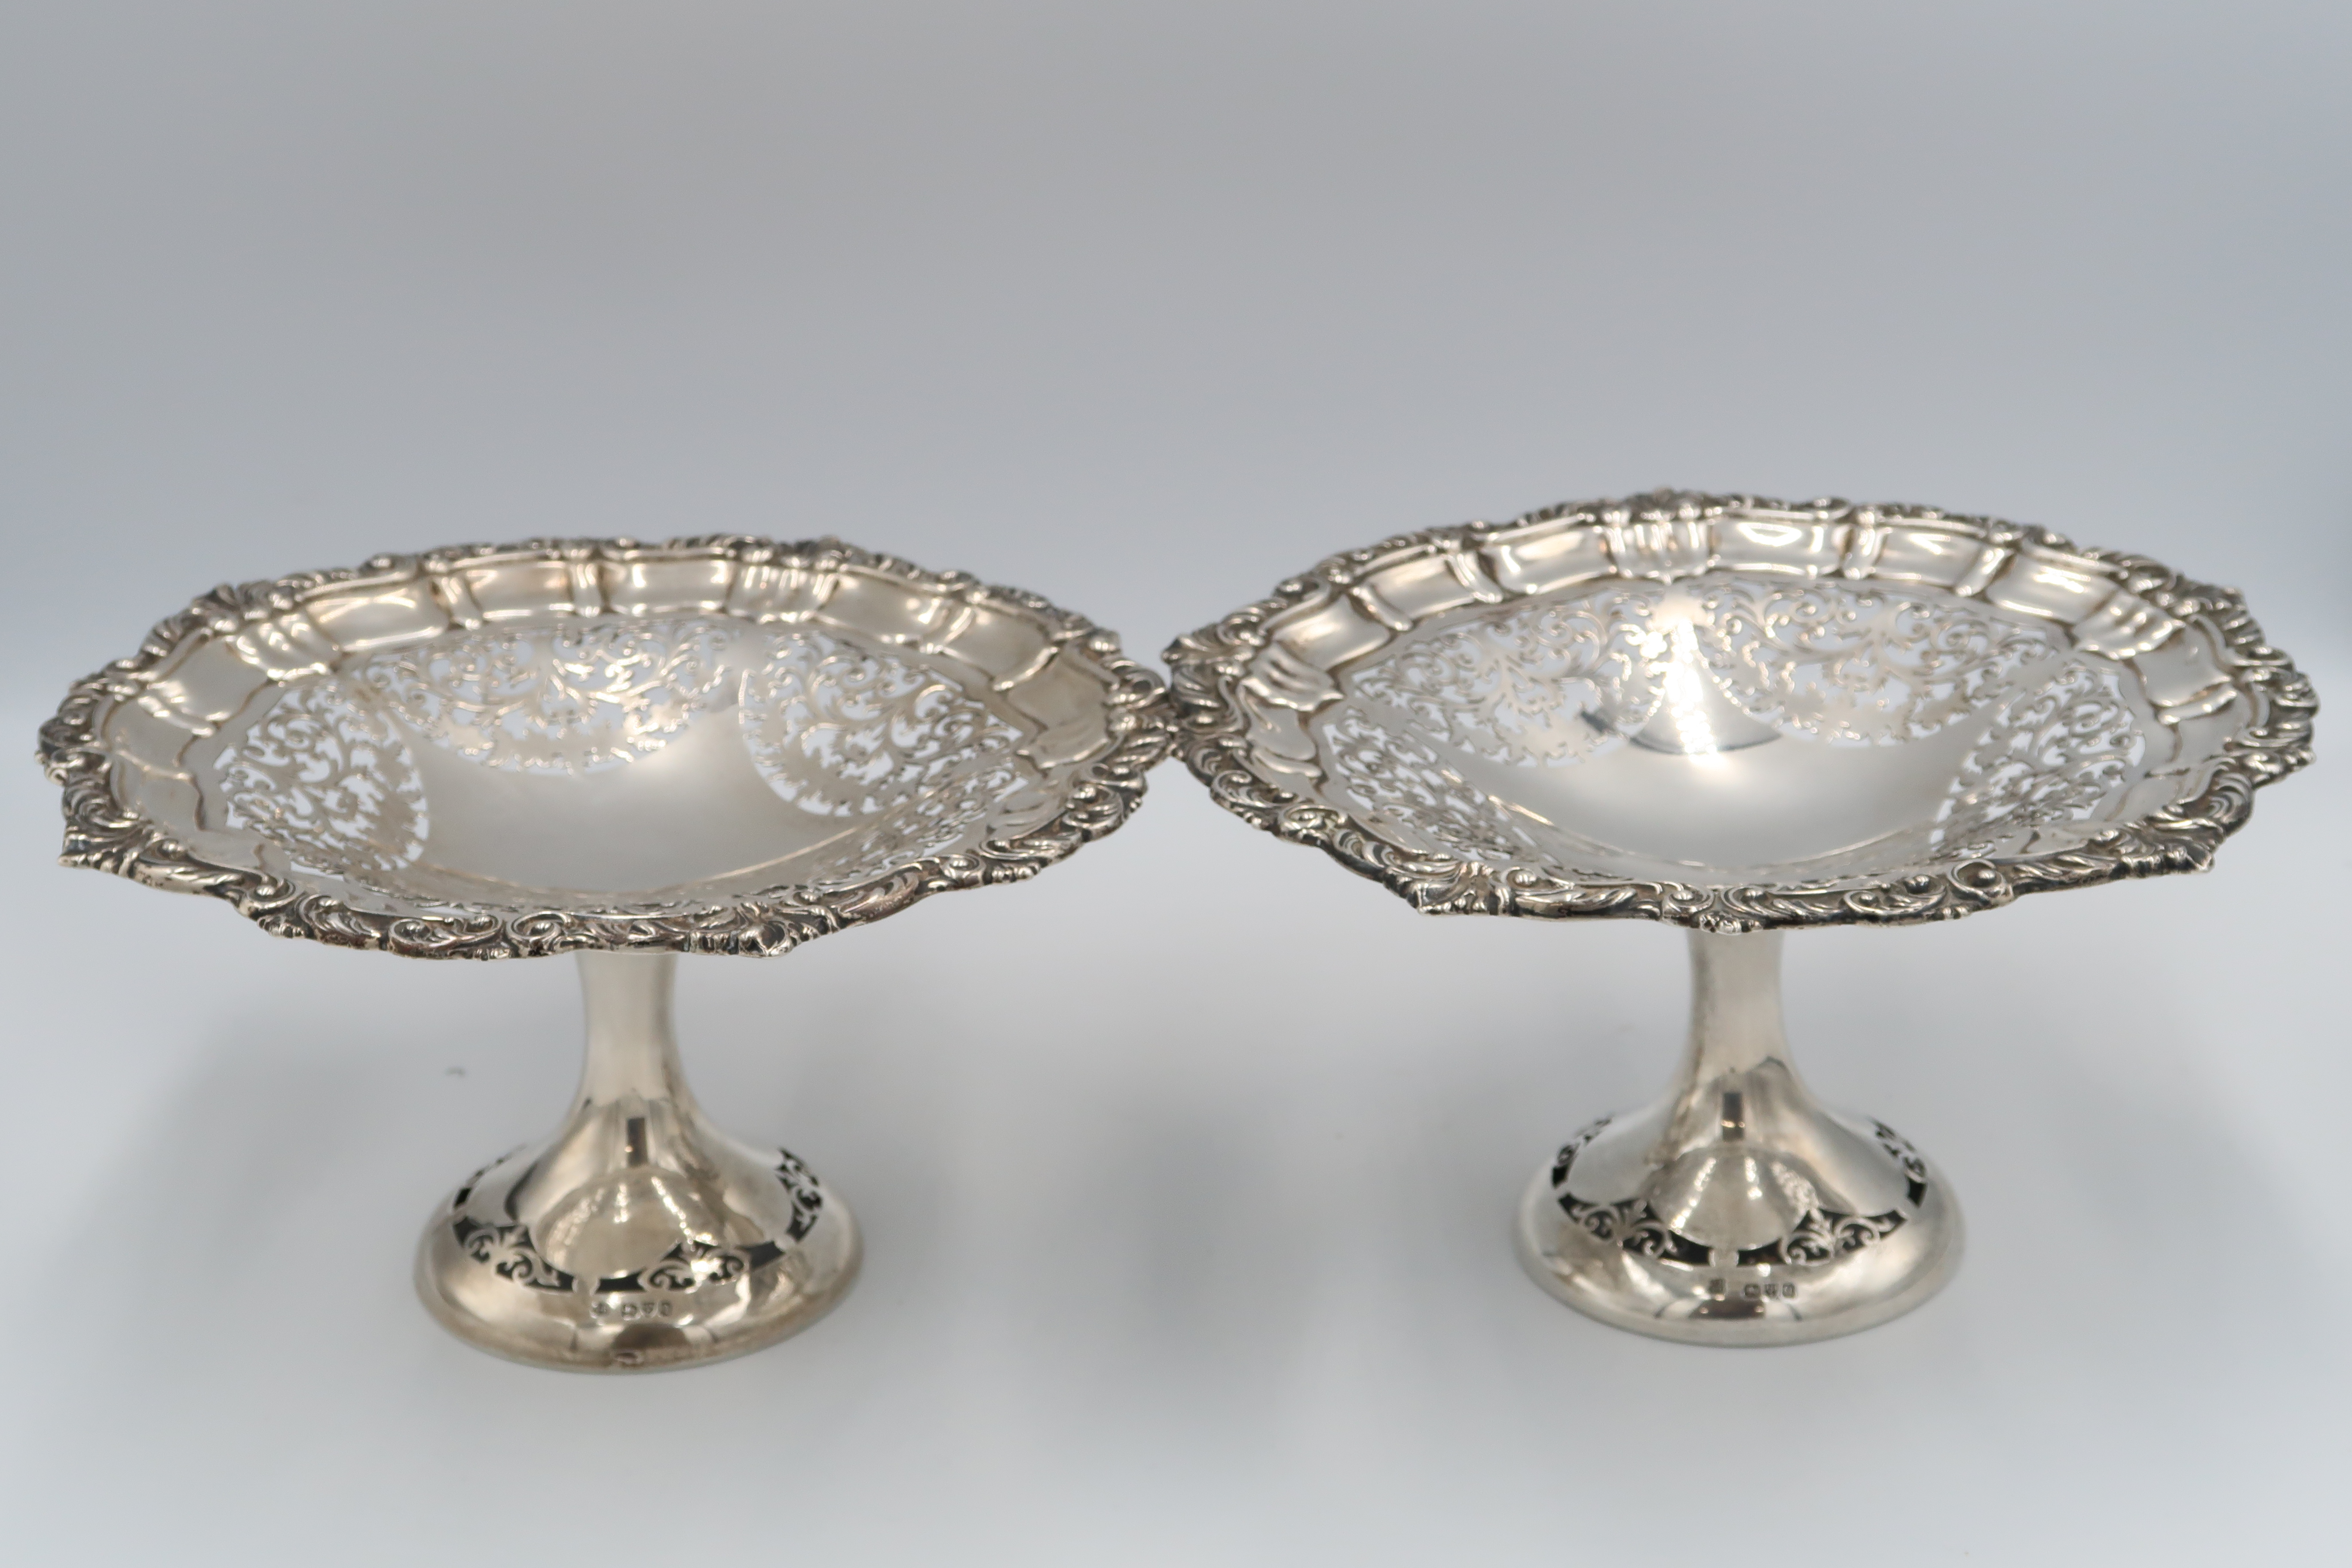 Two silver hallmarked Tazza's with pierced foliate decoration, Chester 1899, James Deakin & Sons,